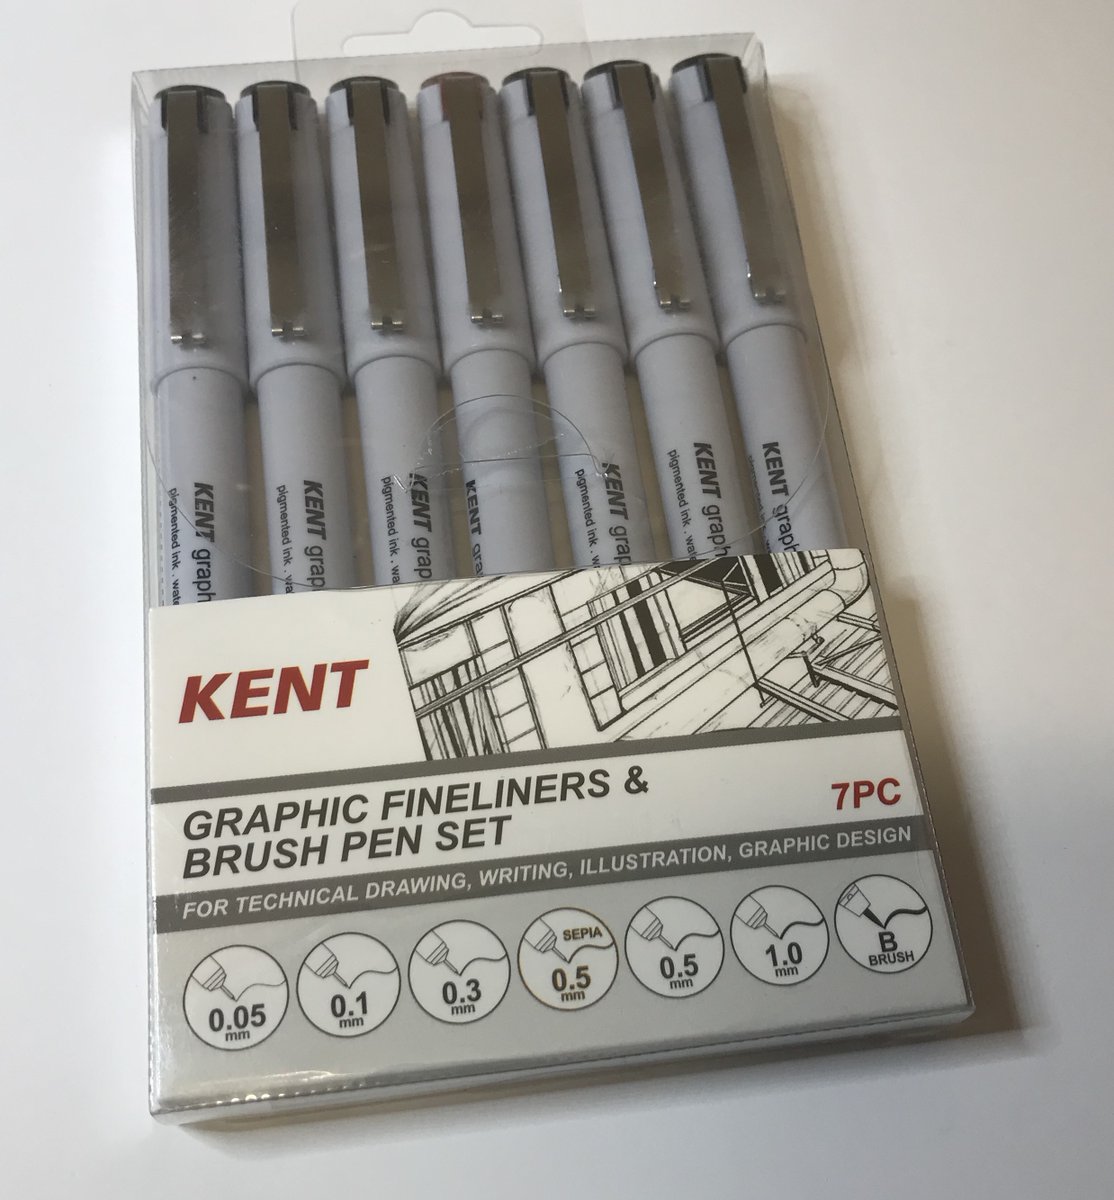 When it was time, I went to this great art shop to buy some artist quality cold pressed Arches watercolour paper. The closest I could find was 22x30in, so I needed to work out the dimension maths. I also bought some new fineliners, & a new Blackwing pencil, my favourite pencil.